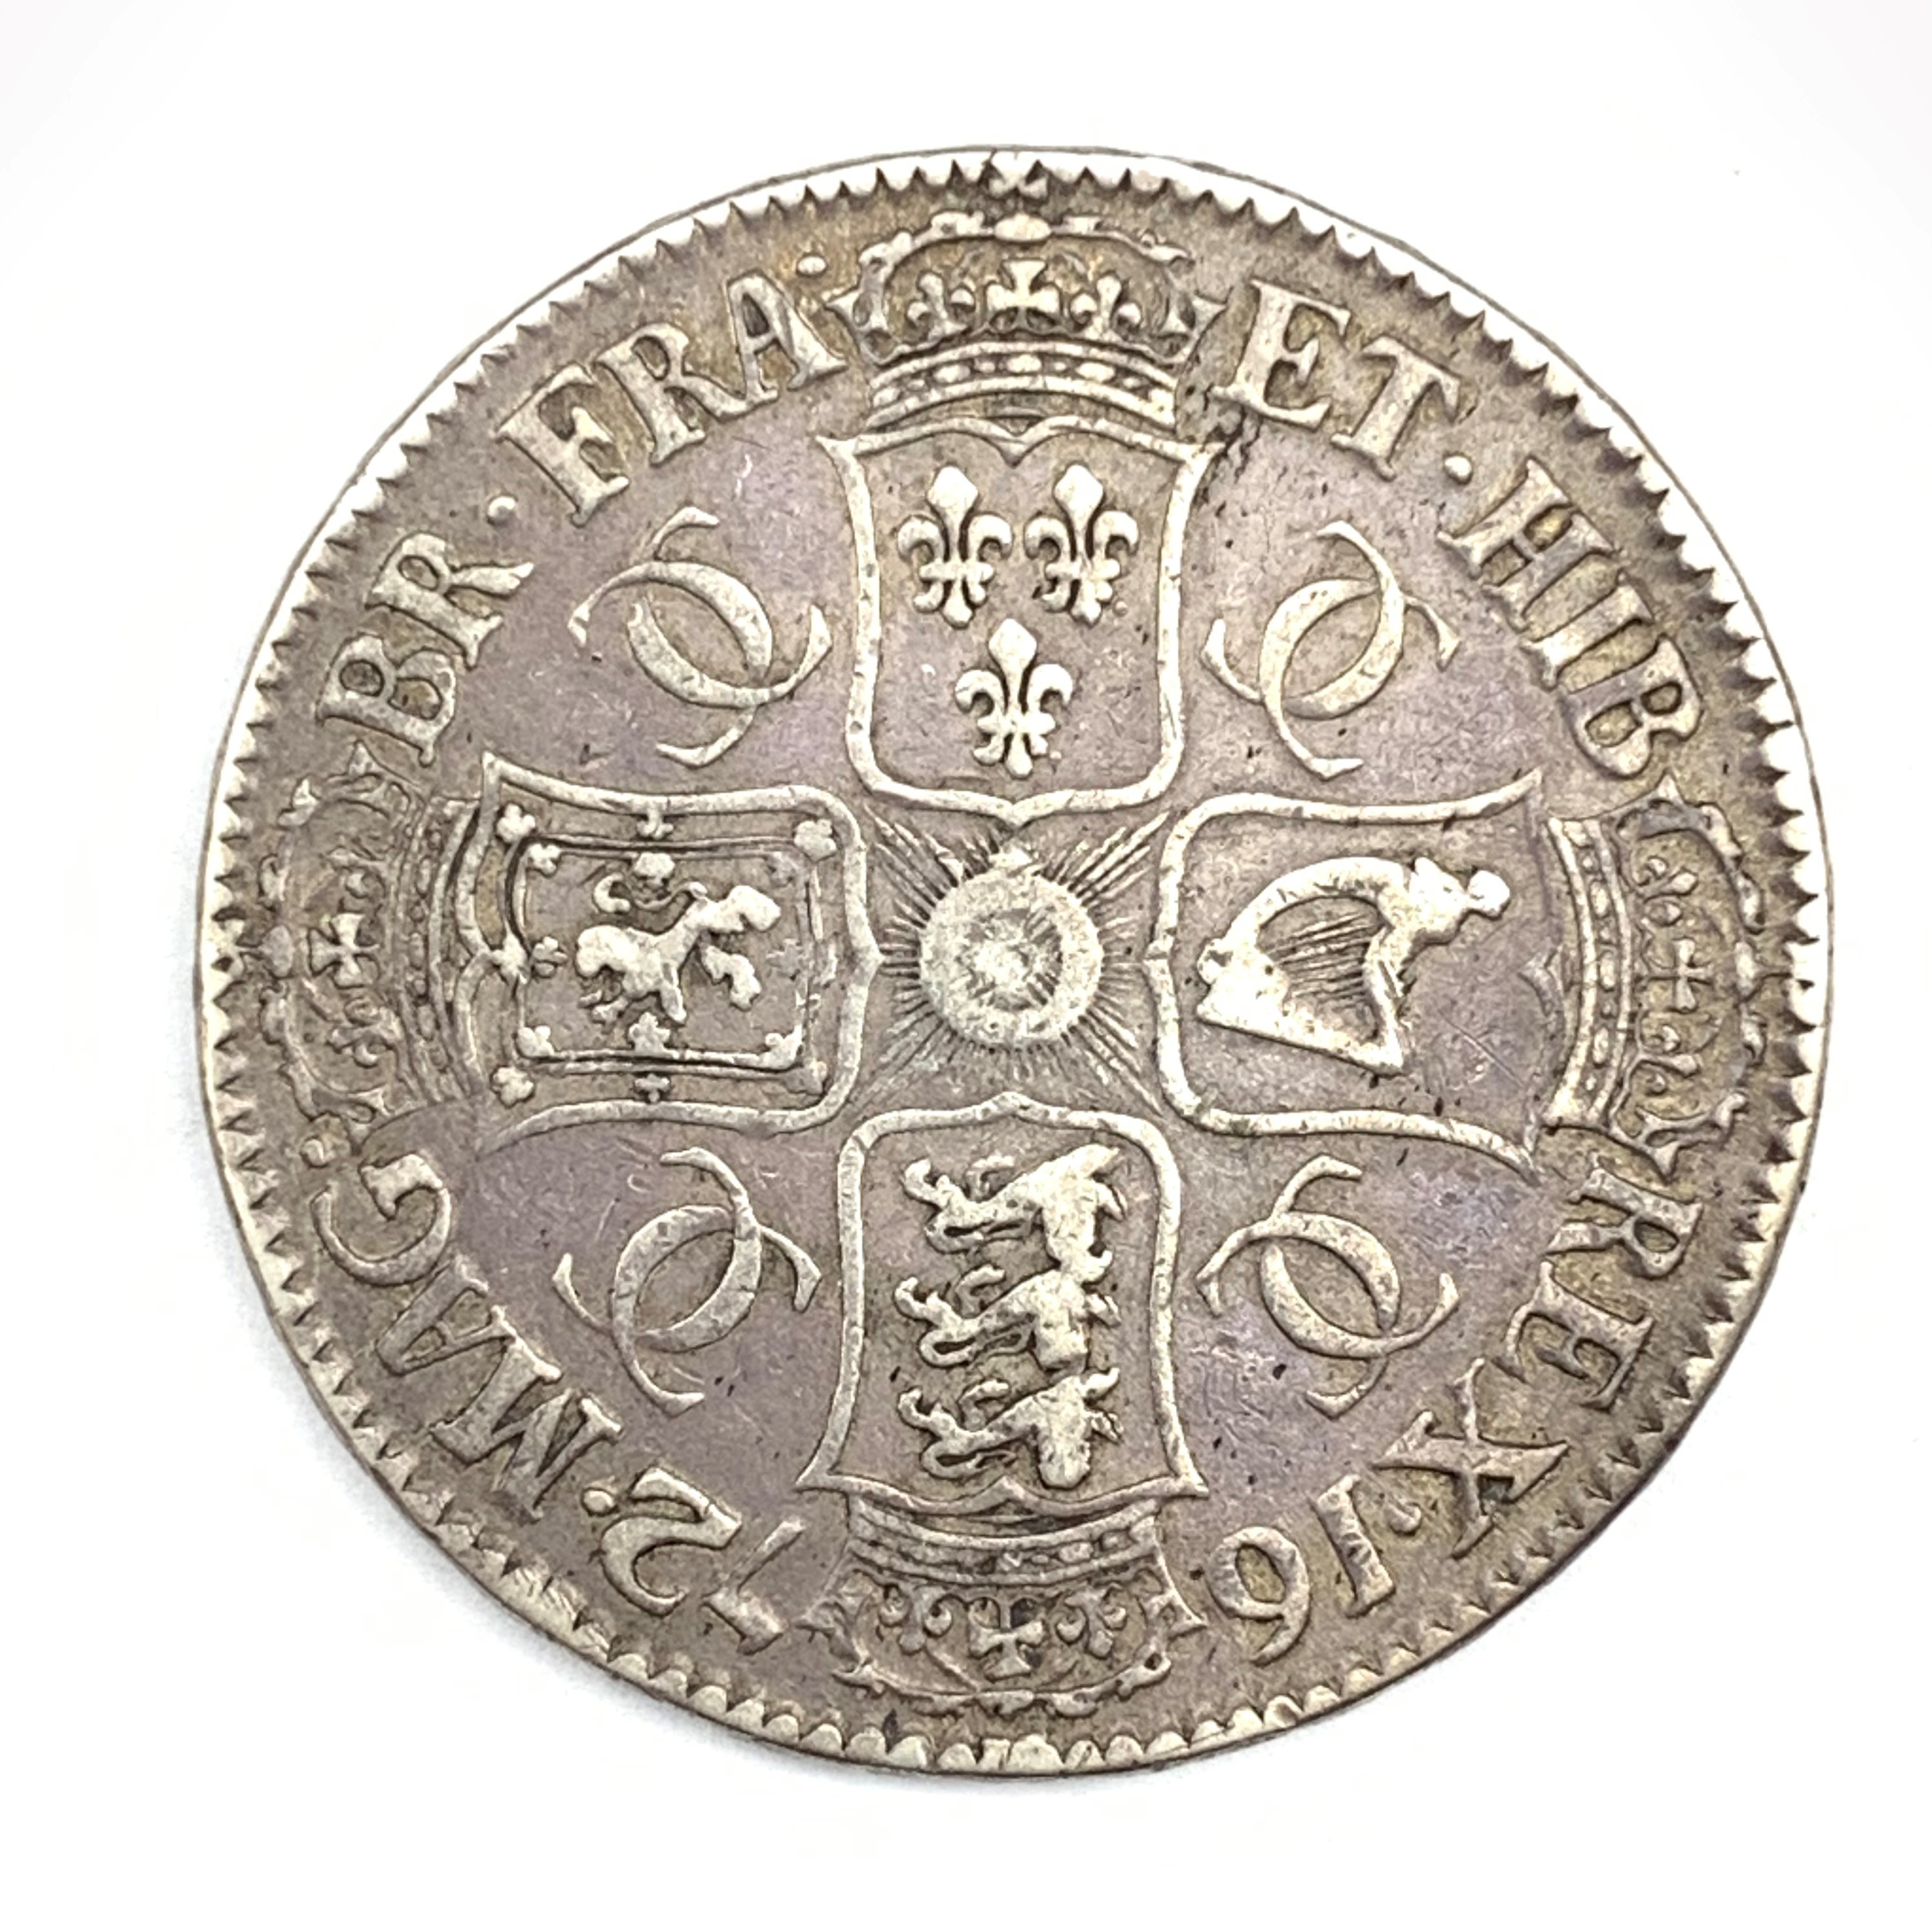 Charles II 1672 crown coin - Image 2 of 2